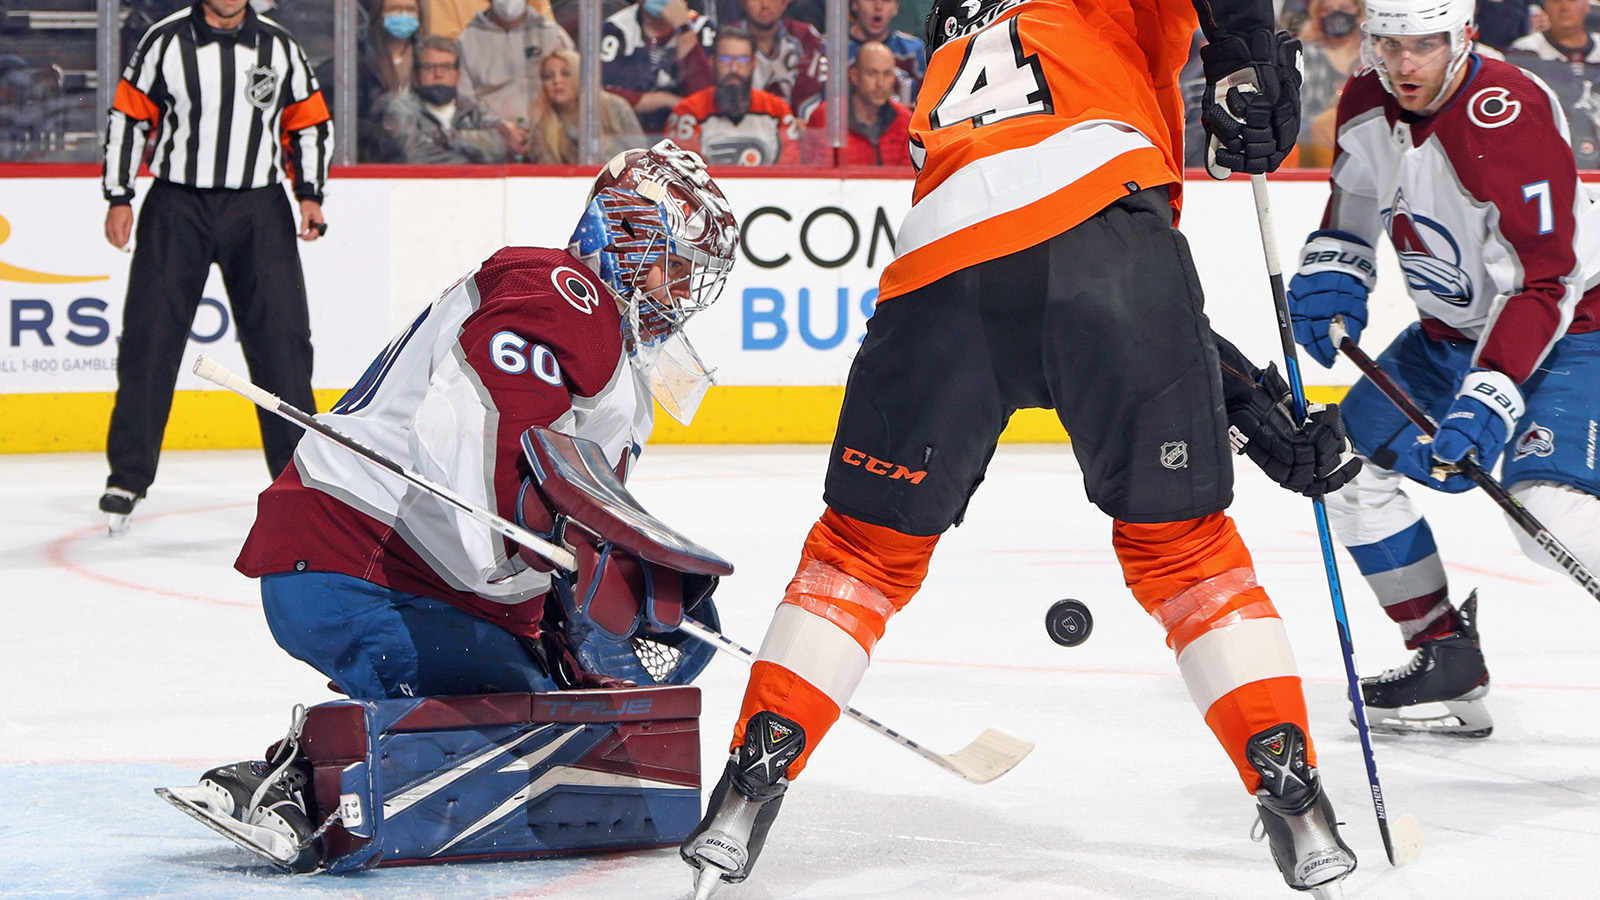 Justus Annunen #60 of the Colorado Avalanche makes the second period save as Sean Couturier #14 of the Philadelphia Flyers looks for the rebound at the Wells Fargo Center on December 6, 2021.